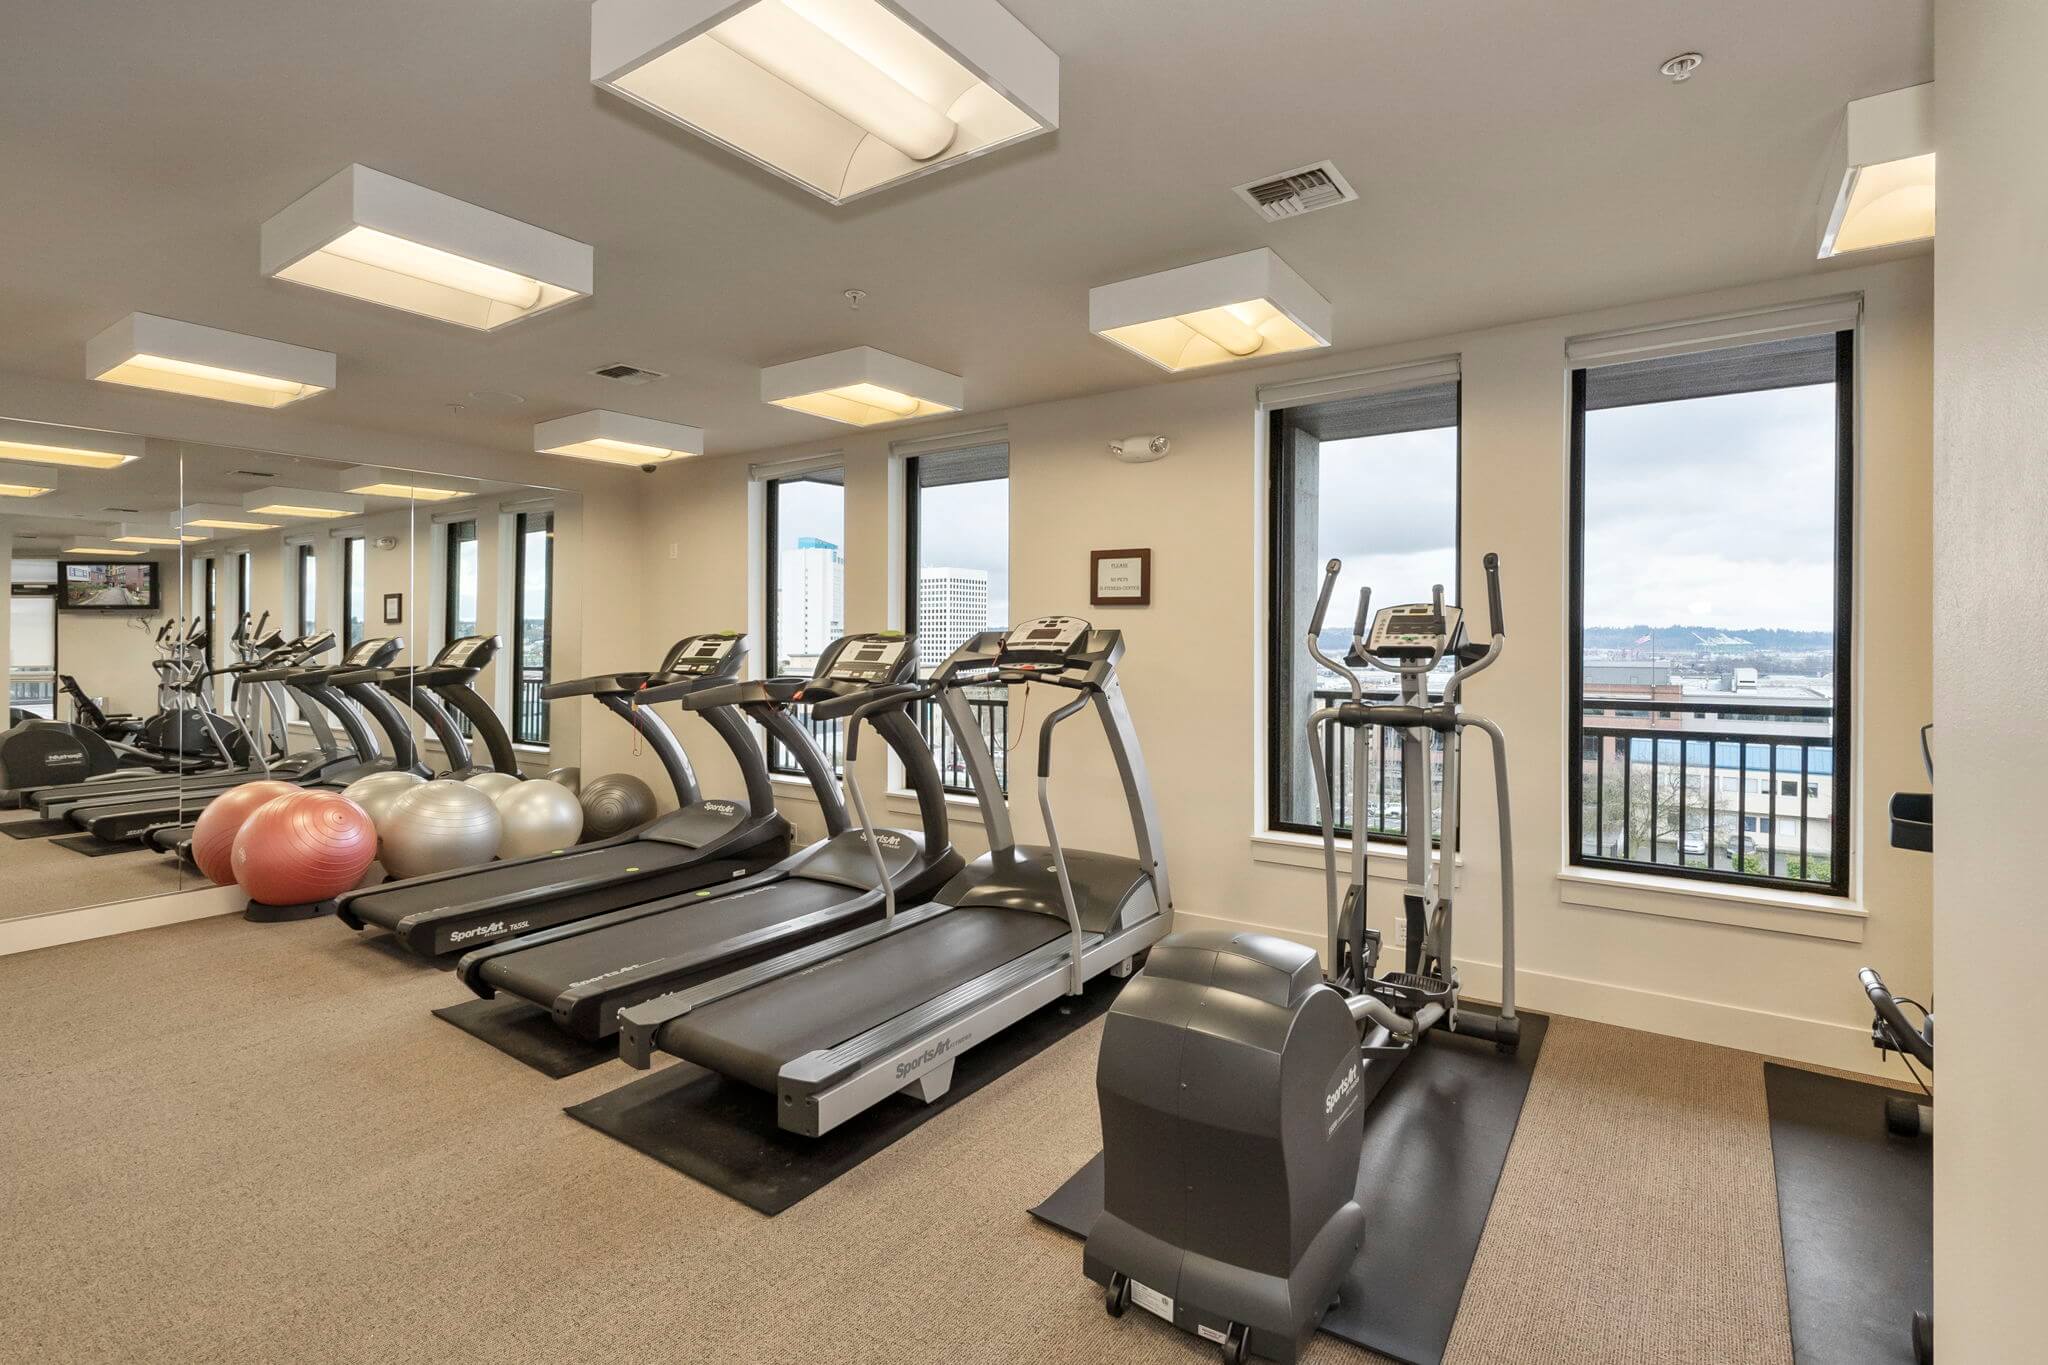 Fitness room with cardio equipment is located on the ground floor